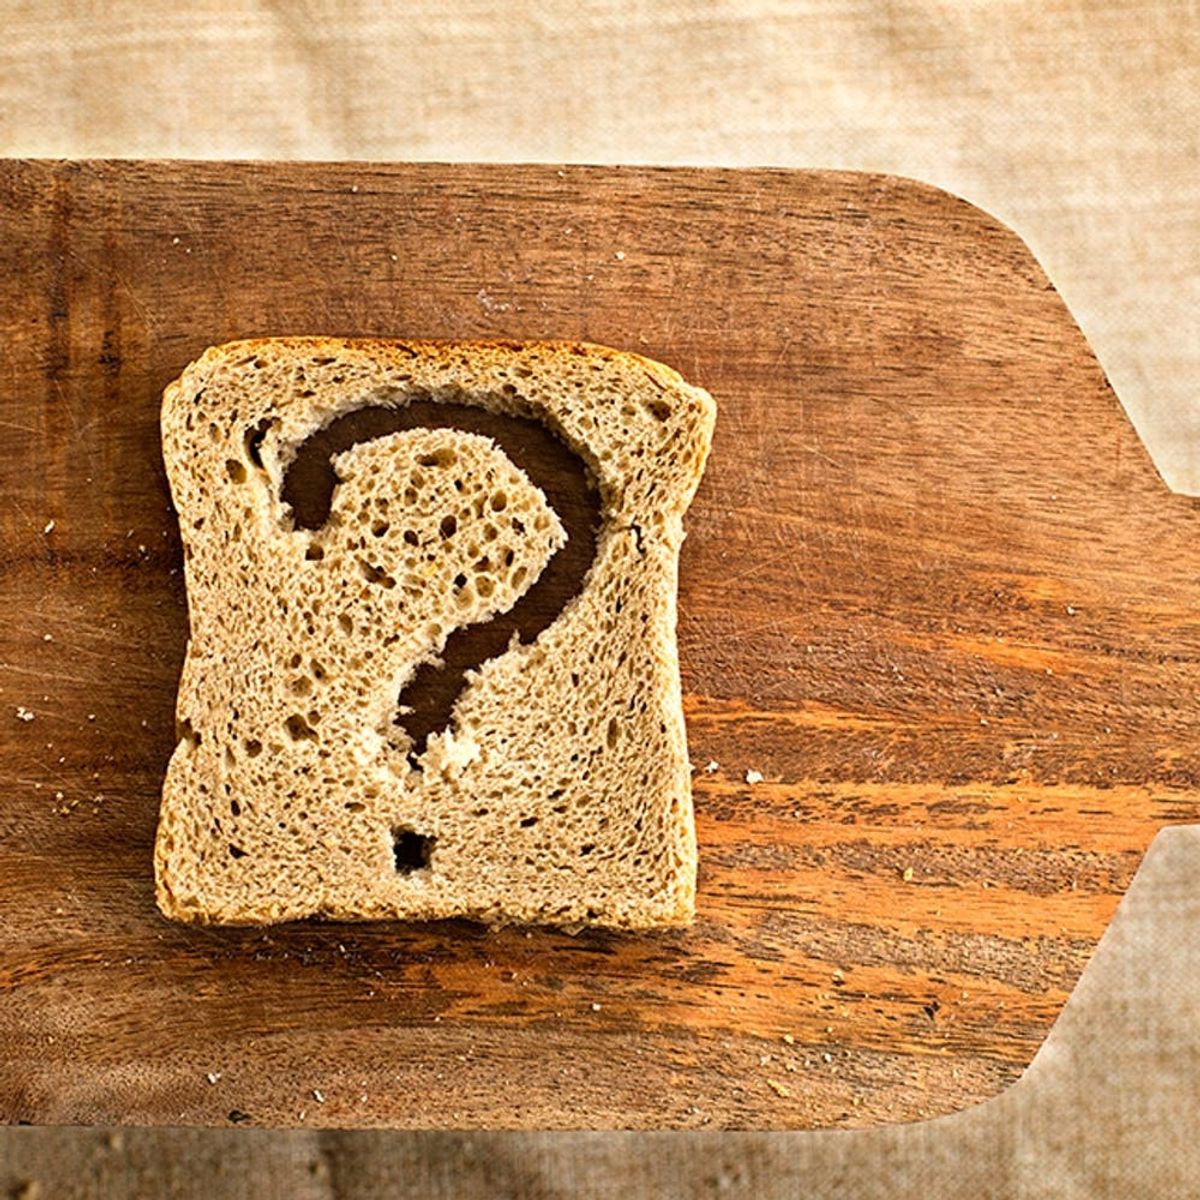 Can a Gluten-Free Diet Help With Endometriosis Symptoms?